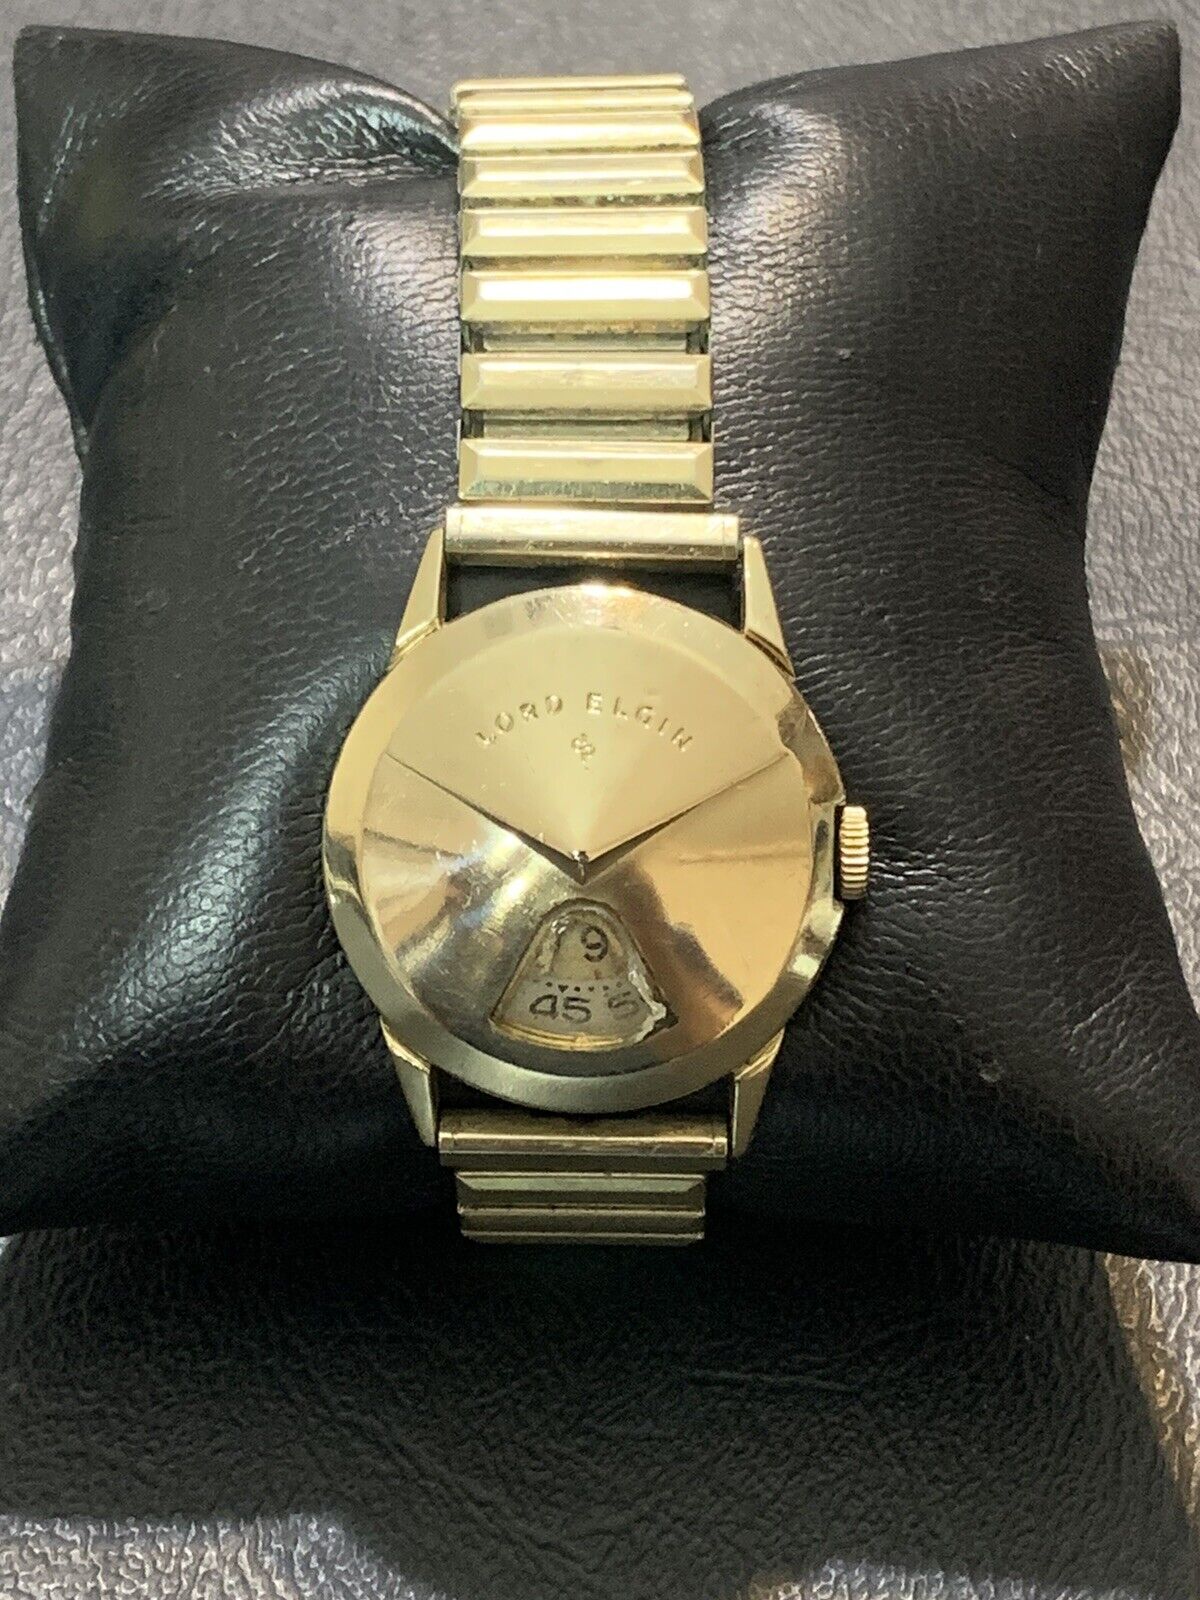 UNIQUE! Lord Elgin Jump Hour Watch 14K Gold Filled 21 J For Parts Or Repair